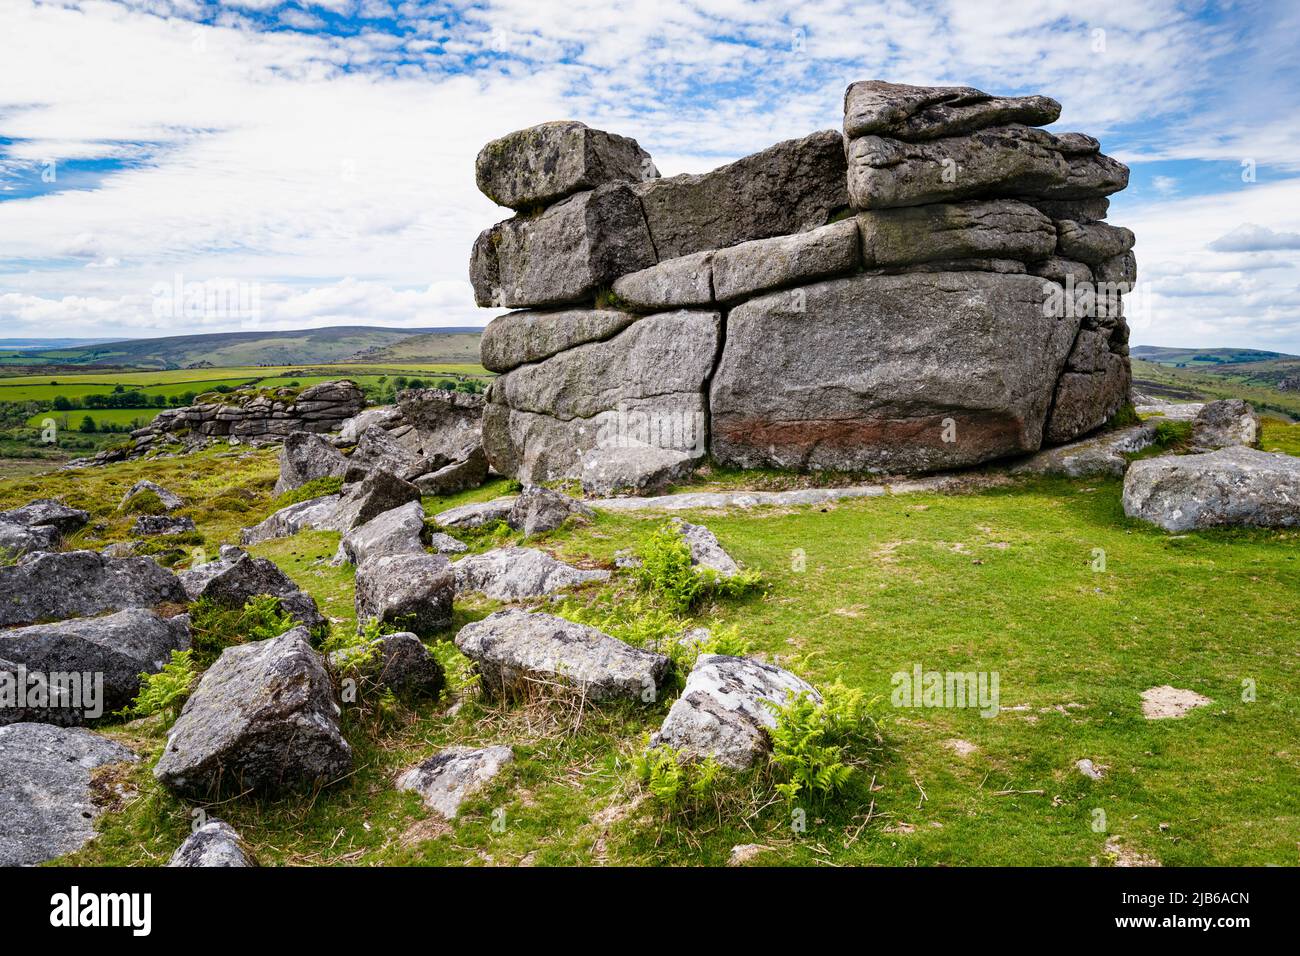 Fitches Holt, one of several granite outcrops at Emsworthy Rocks, near Haytor in Dartmoor National Park, Devon, UK. Stock Photo